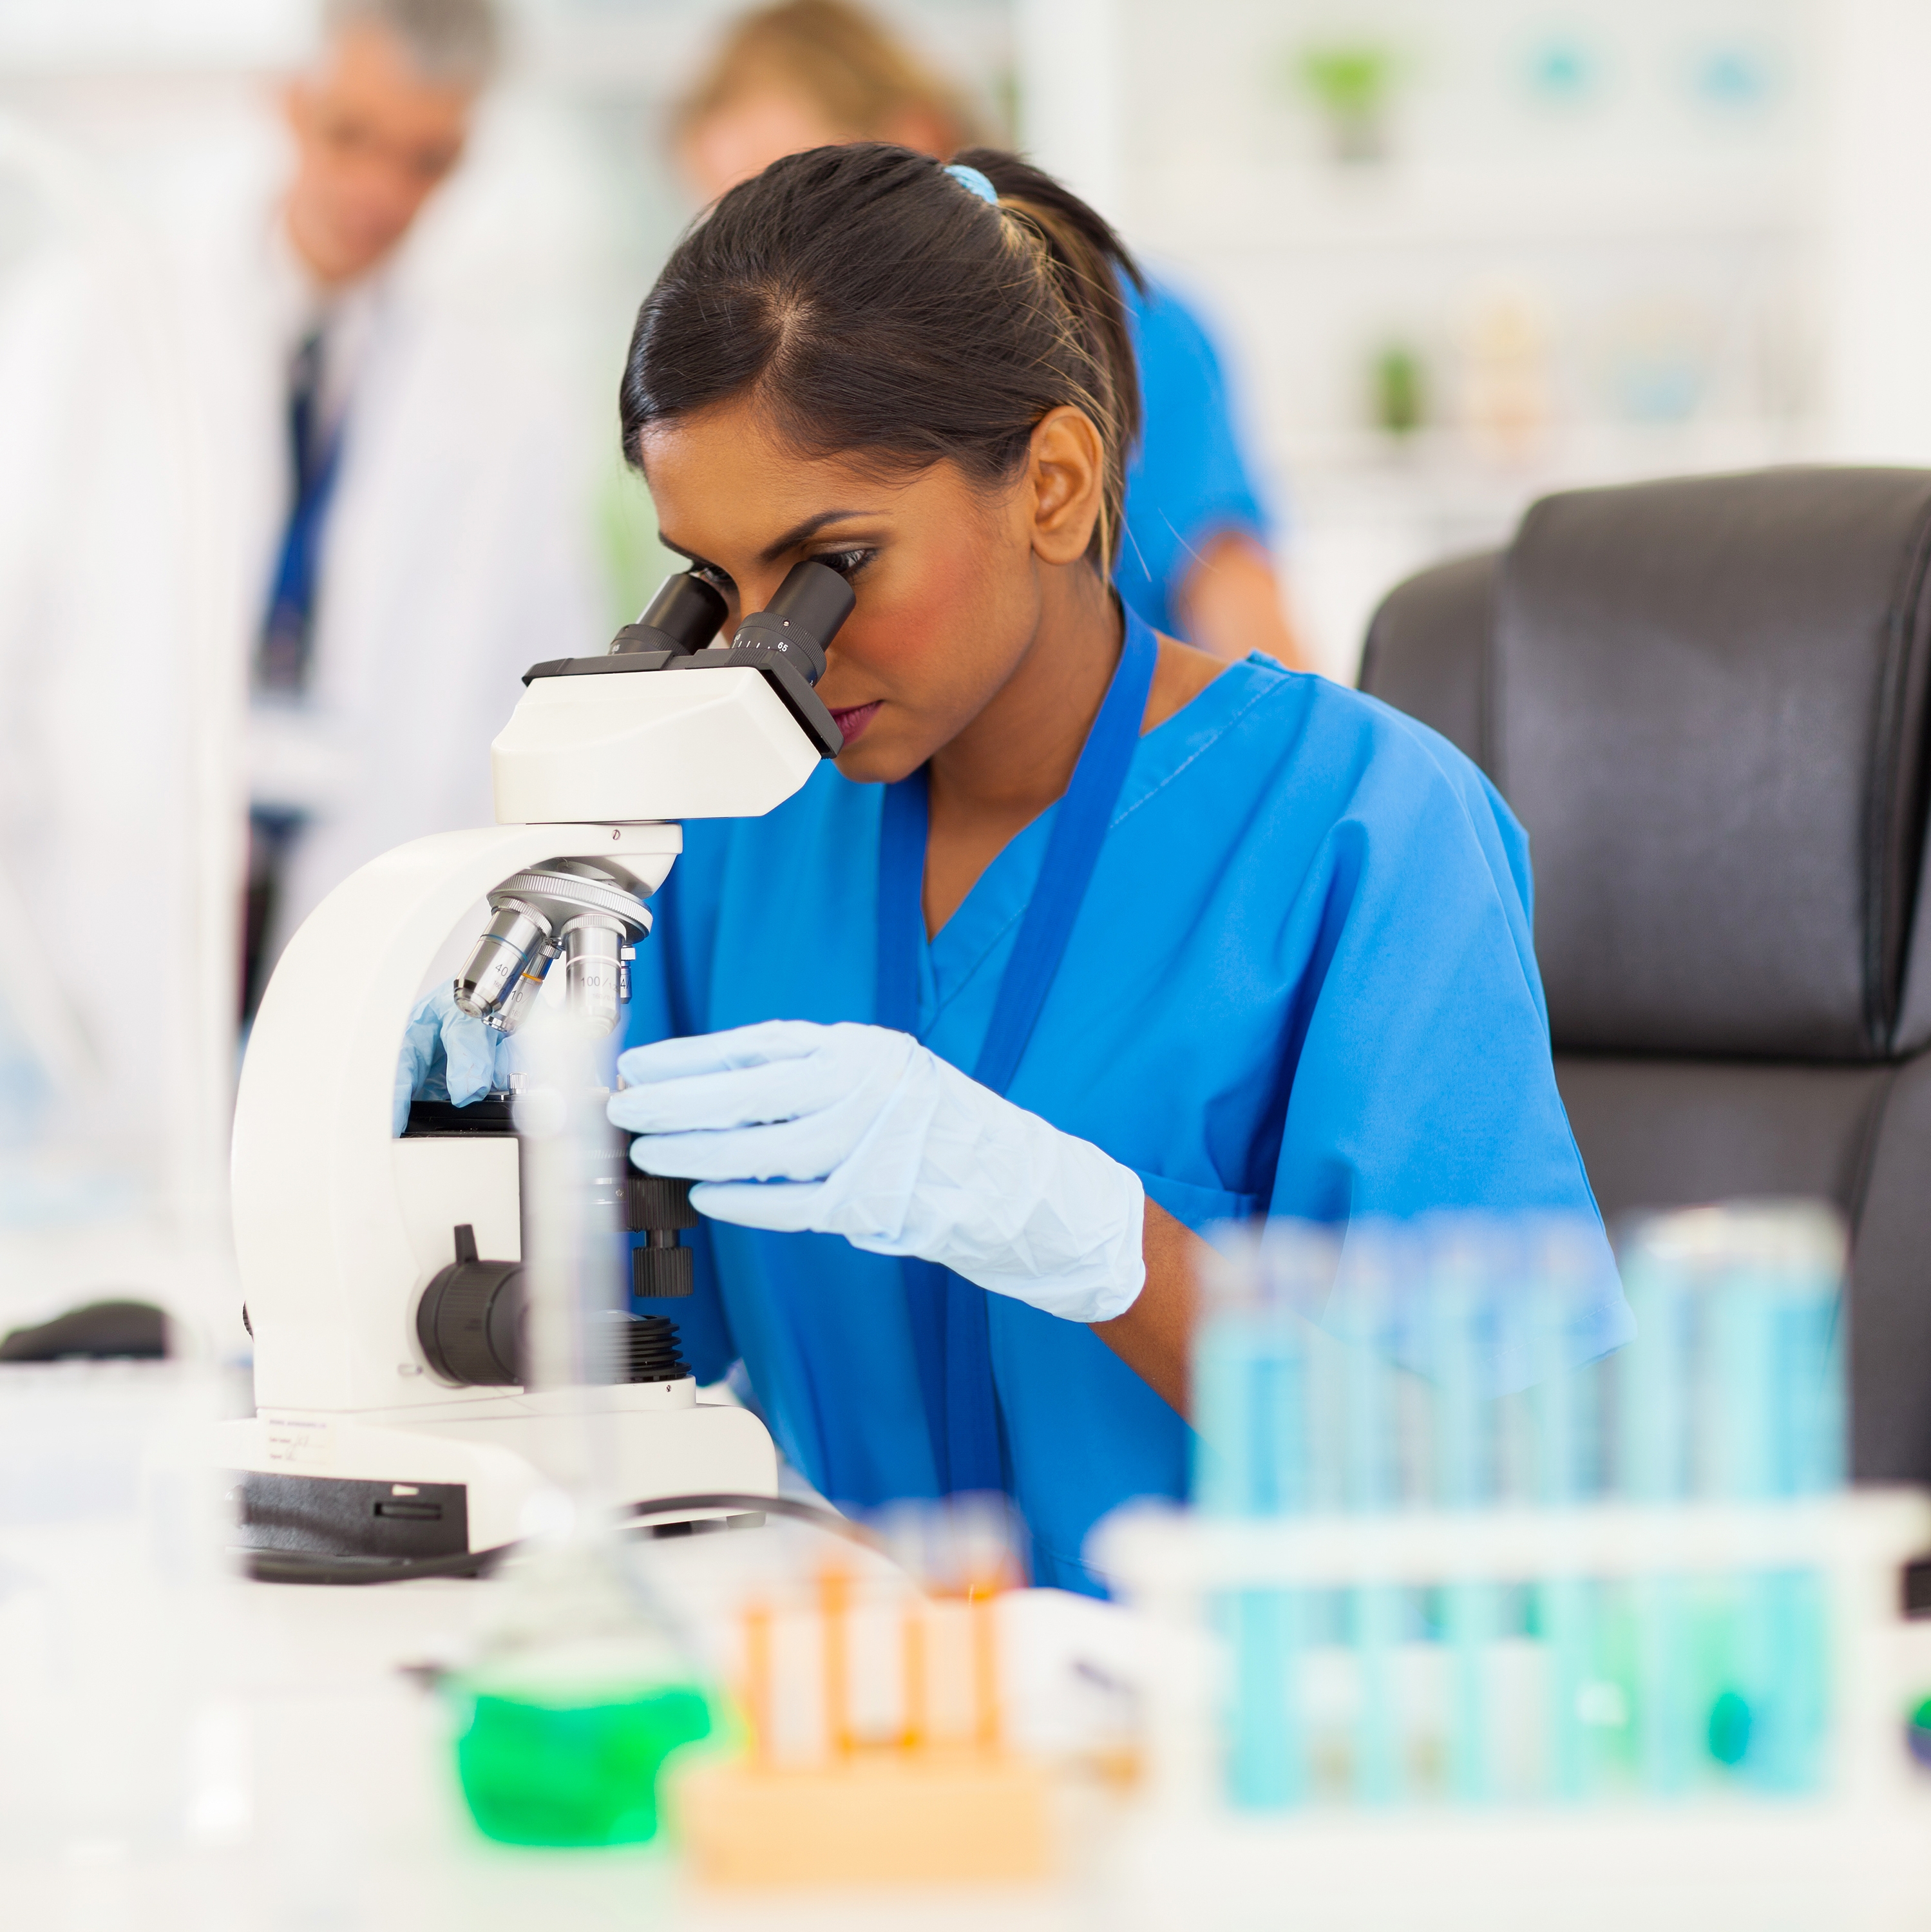 A scientist testing and working on the microscope inthe Lab